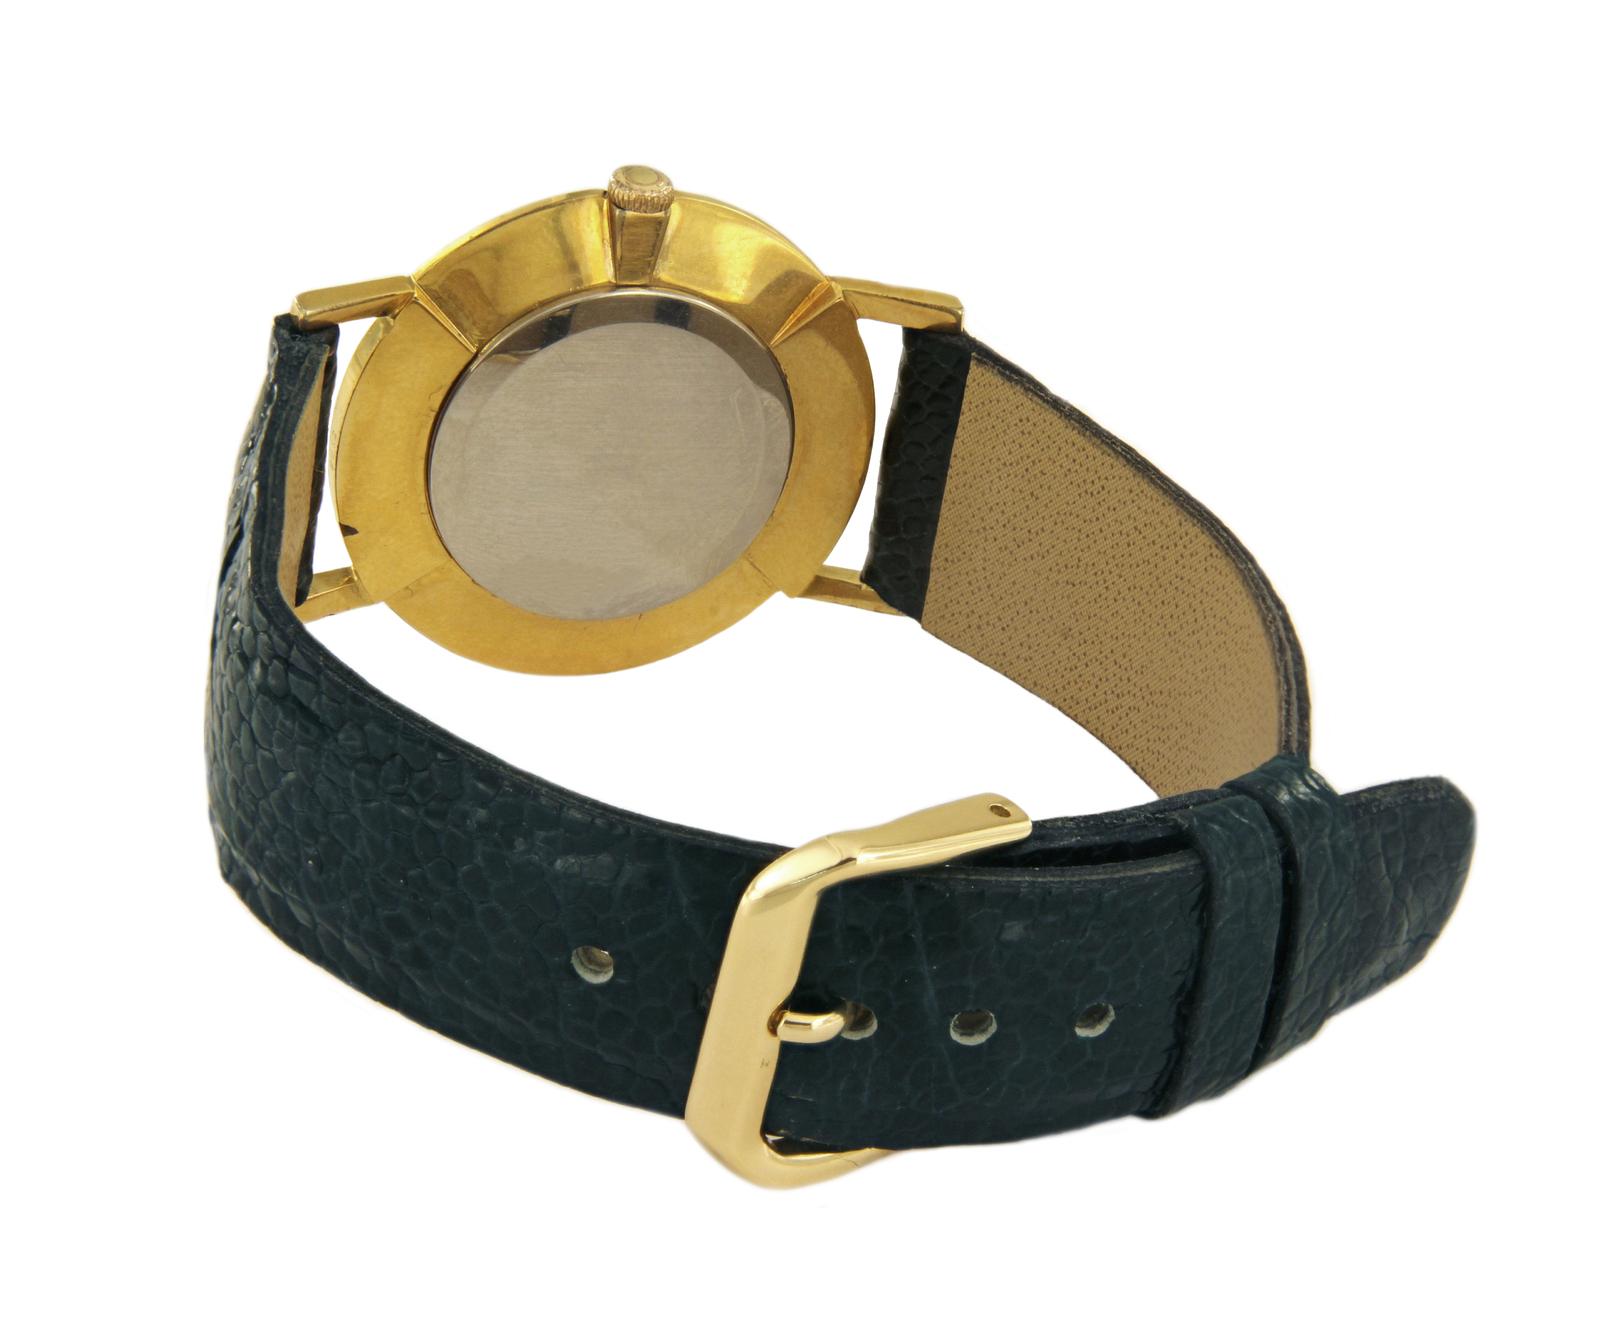 OMEGA TWO-TONE MANUAL MOVEMENT WATCH 31MM

-Sold as is (scrathes on the case). Vintage.
-Case size: 31mm
-Stainless steel & Gold plated
-Case thickness: 6.6mm
-Regular strap & Buckle
-Green Leather Strap
-Pull-push crown

*Comes with Box, No Papers. 